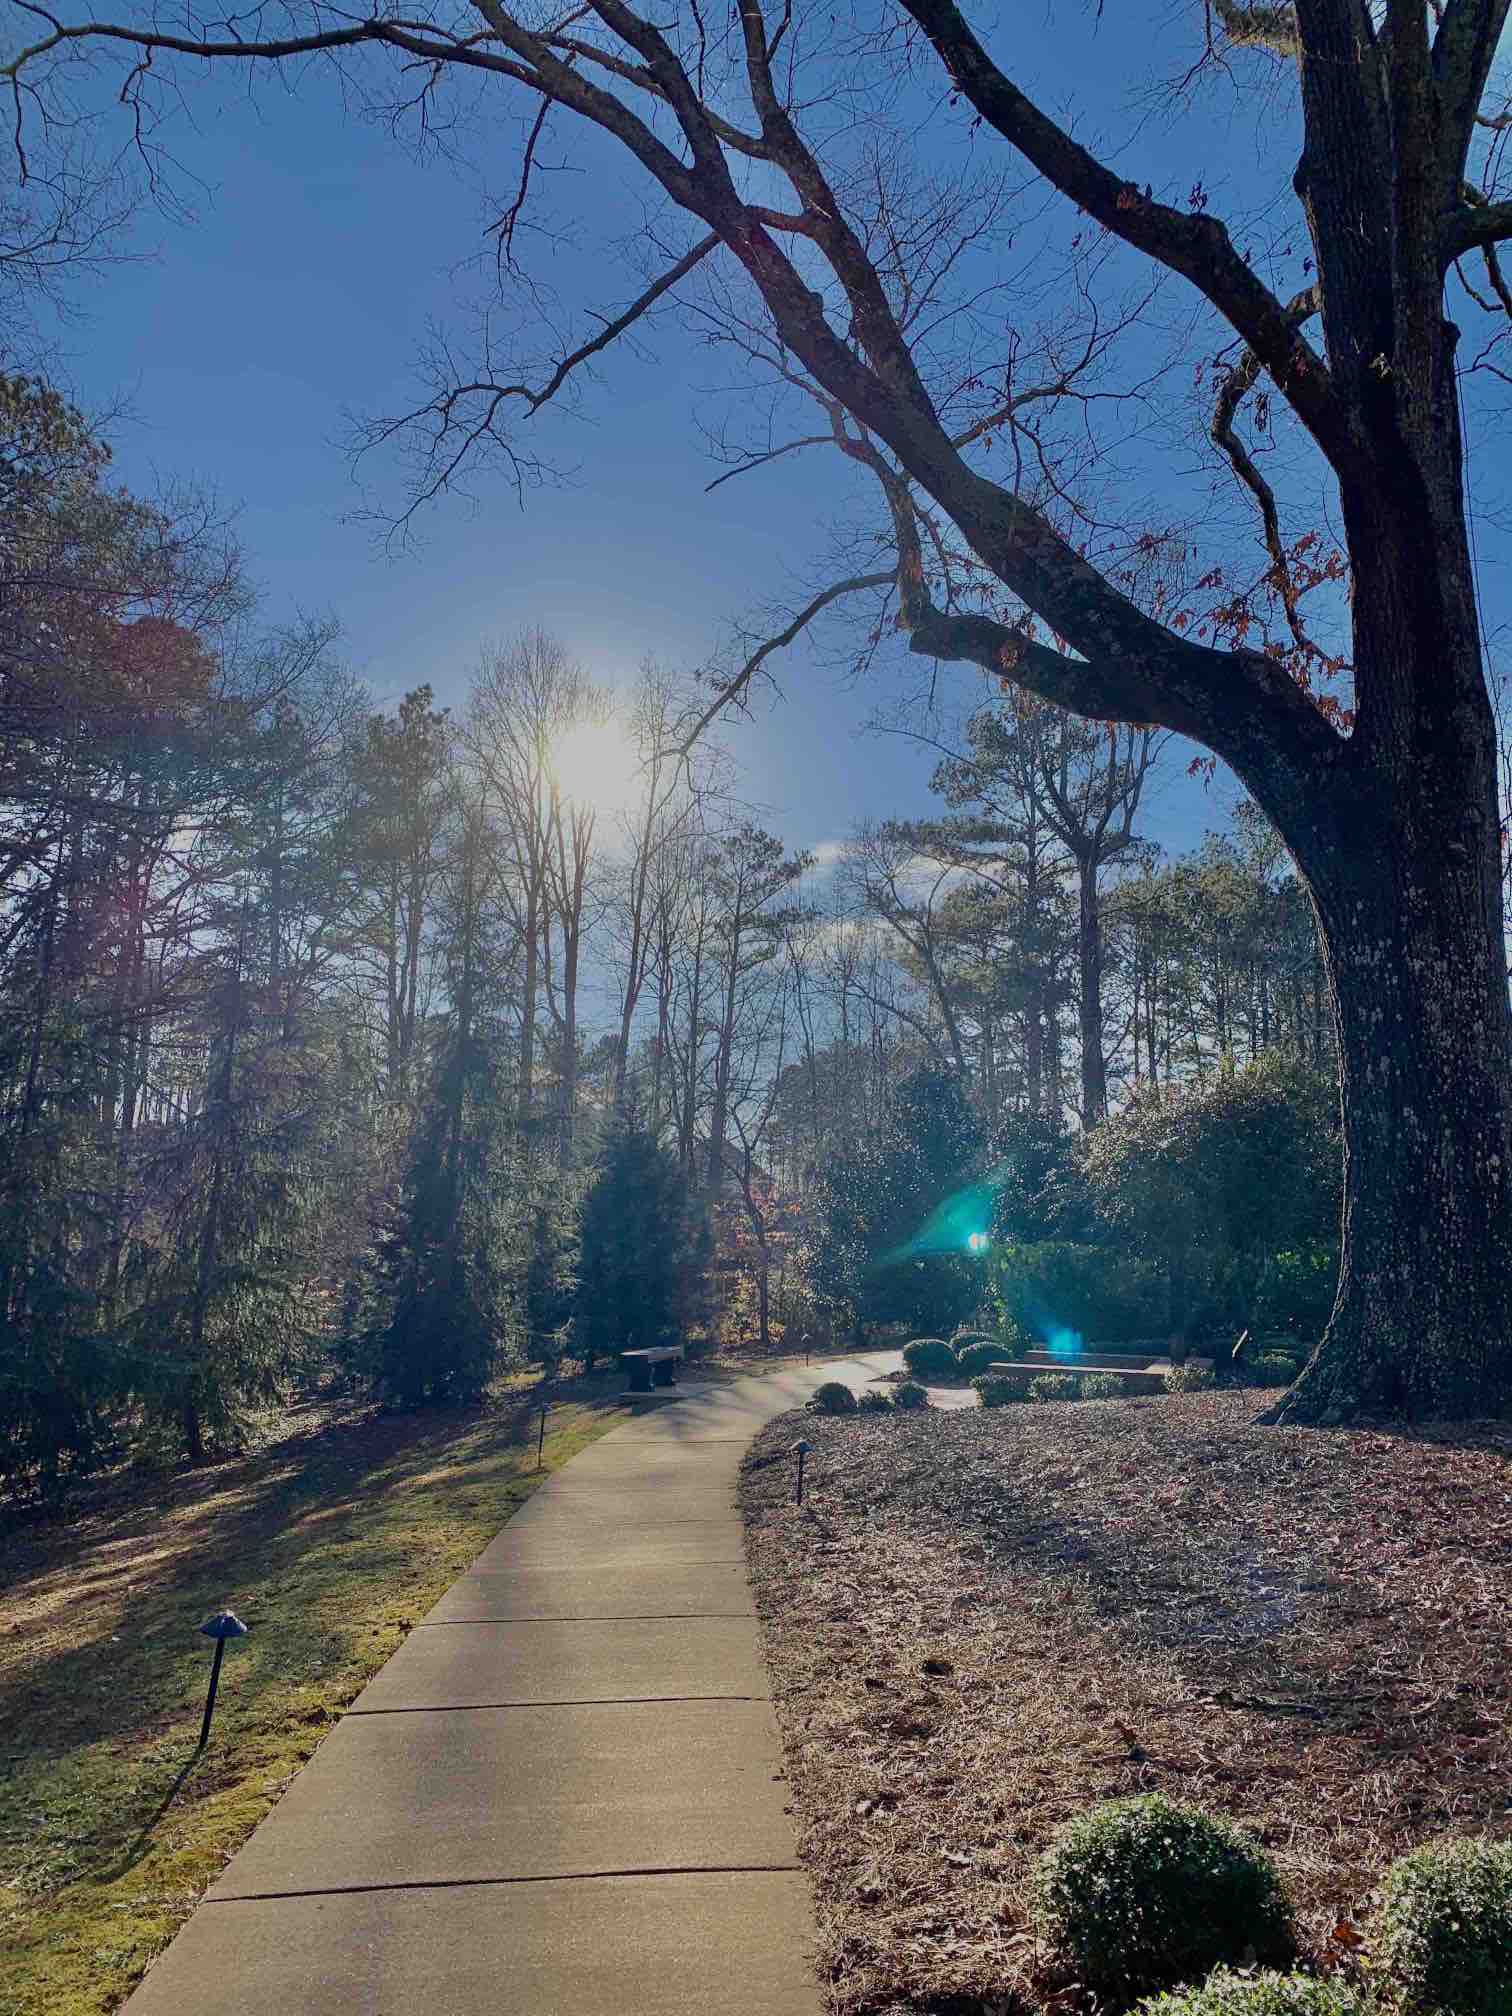 A photo of the midday sun shining through some trees in a forest. In front of the camera is a concrete sidewalk that slowly bends to the right.